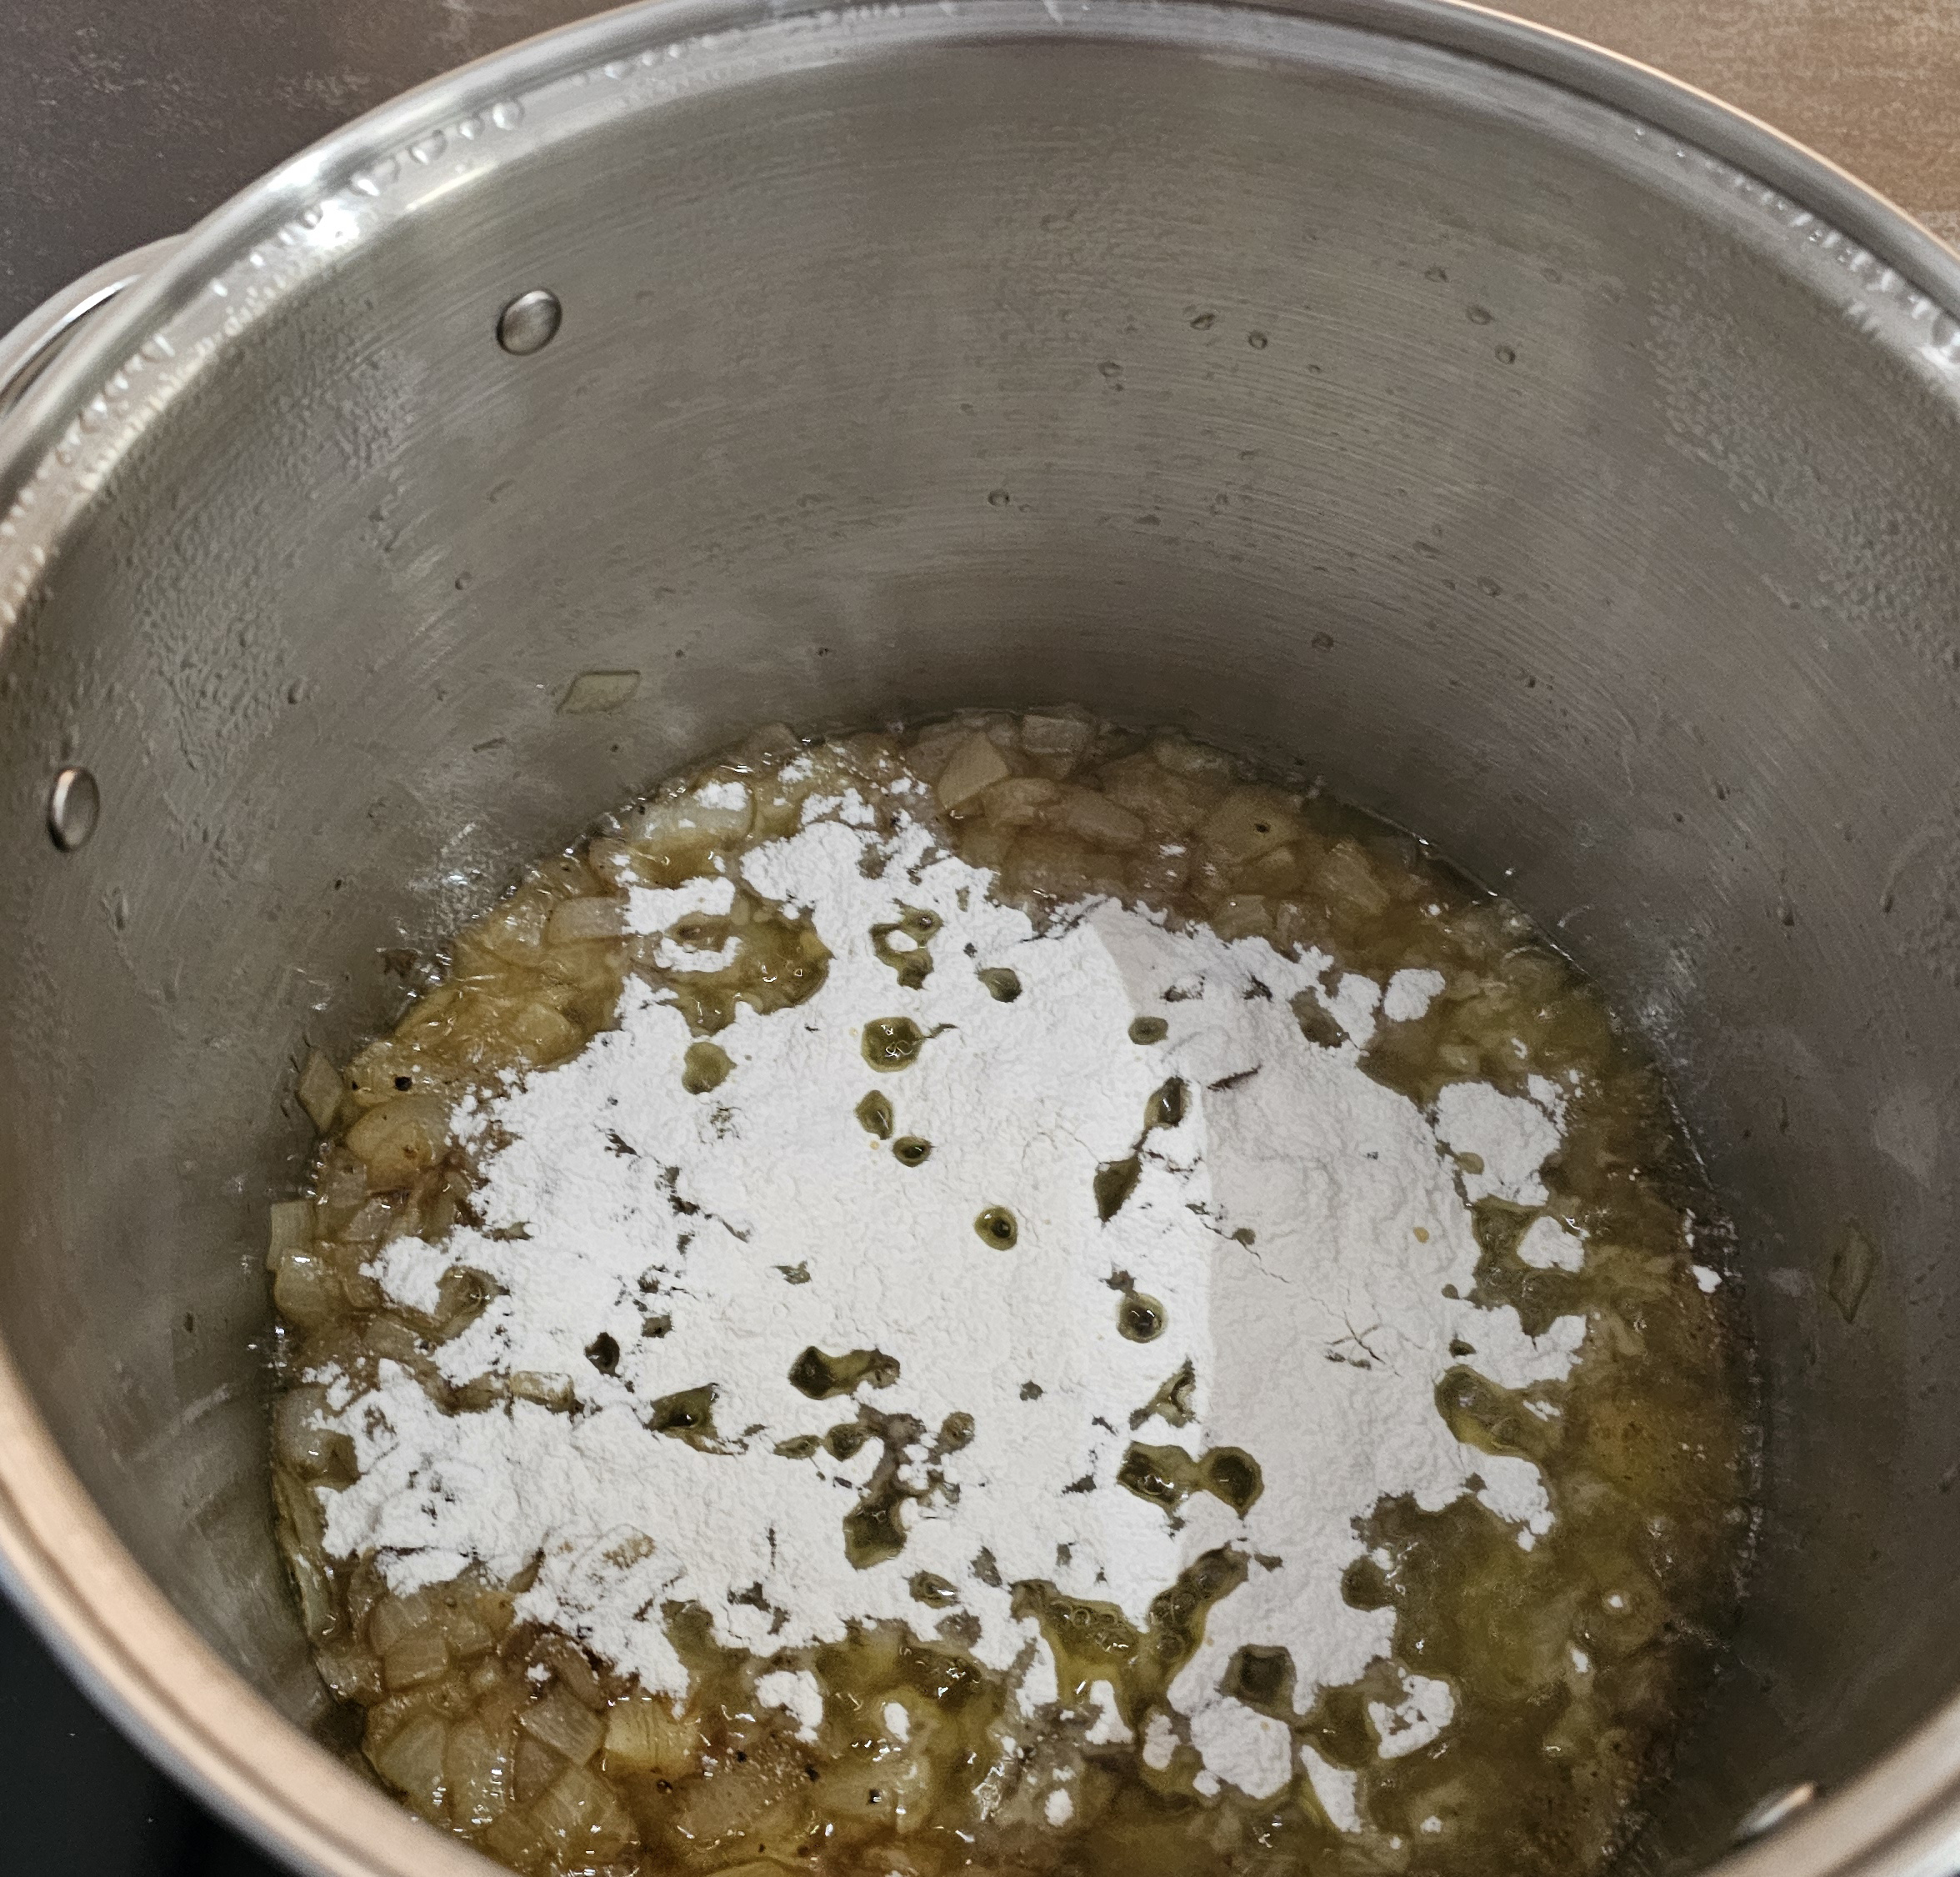 Pot with onions, oil, and flour sprinkled on top